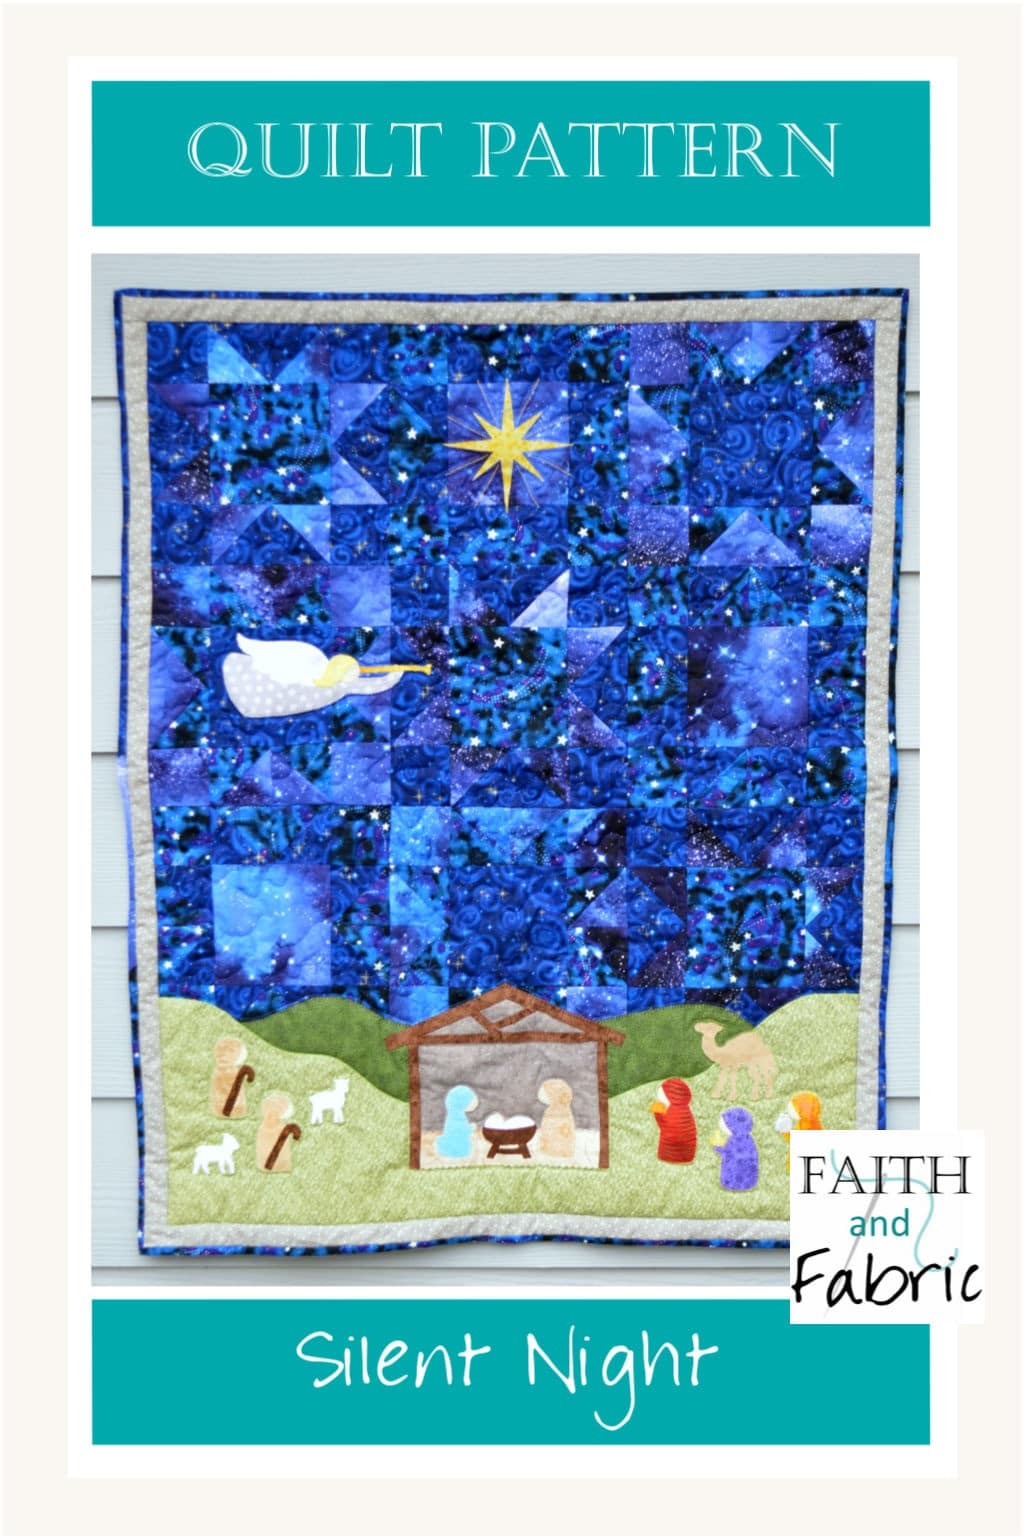 This beautiful Christian quilt pattern shares the first silent night; the dramatic stars in the sky in this Christmas quilt pattern create the backdrop for Mary, Joseph, and Jesus come Christmas morning. Quilt pattern designed by Faith and Fabric.